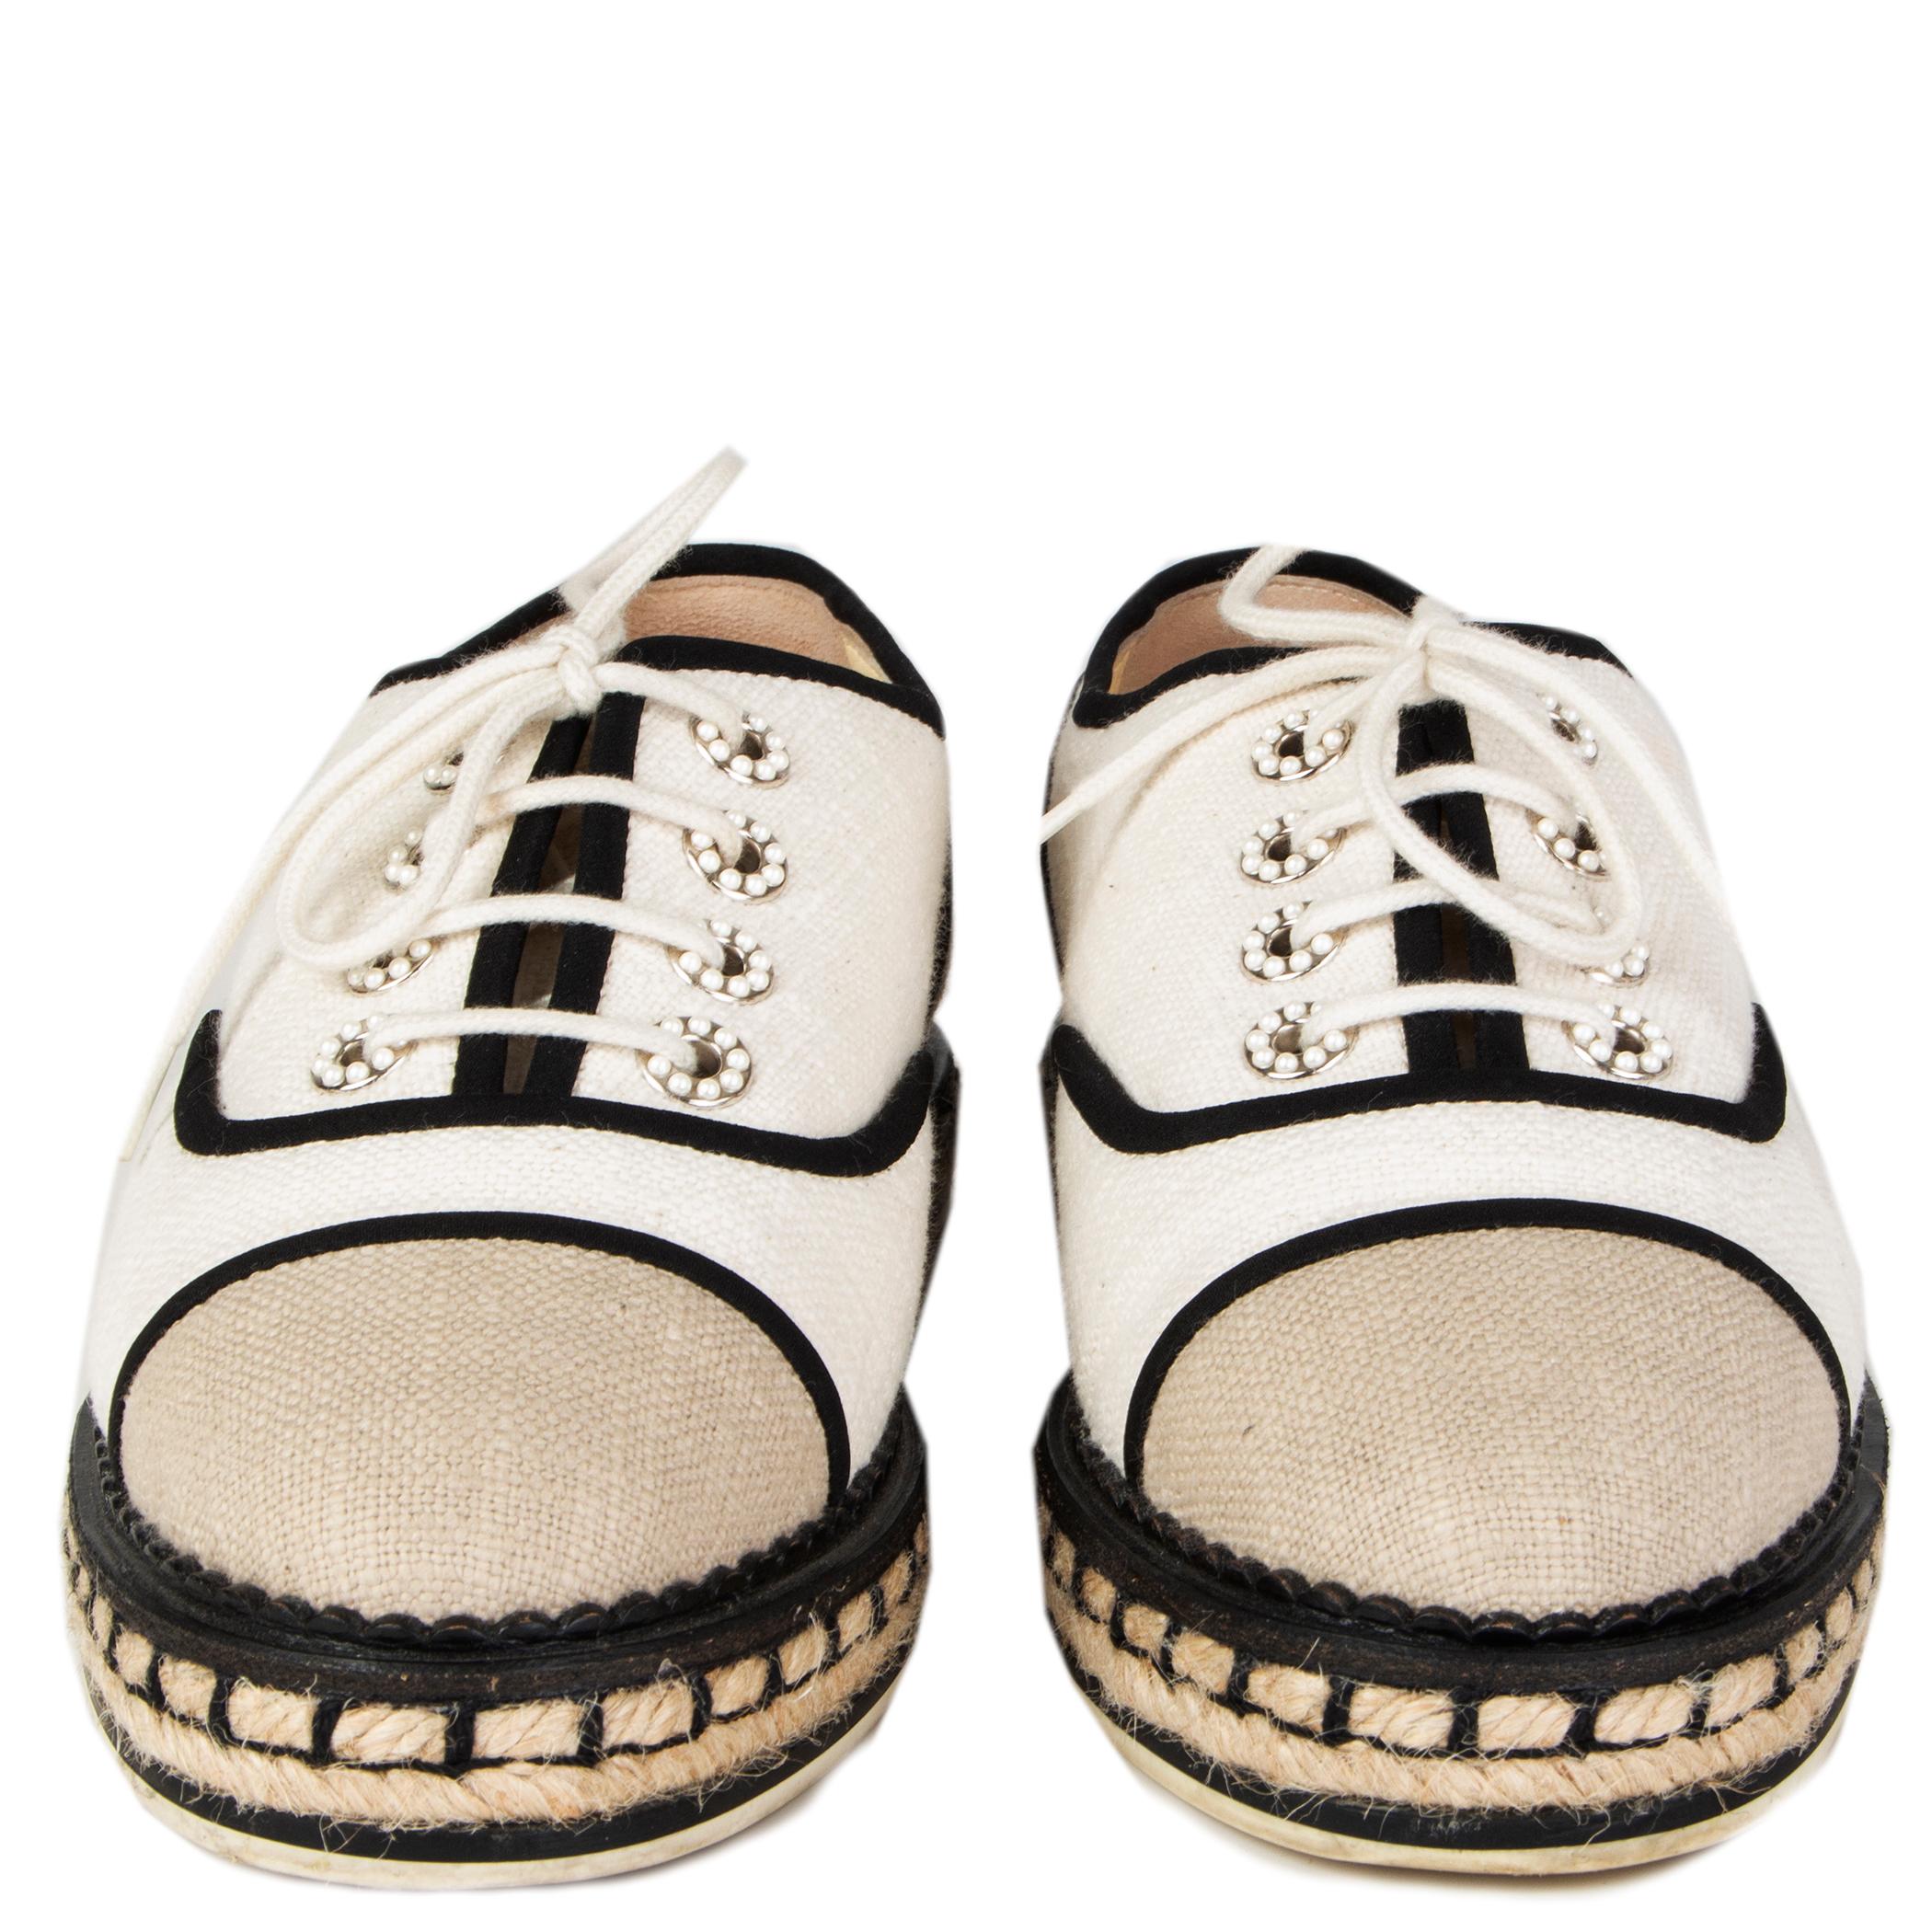 100% authentic Chanel espadrille lace-up tennis style sneakers in oatmeal and off-white canvas featuring black silk trimming and pearl-buttons. Have been worn and are in excellent condition. Come with dust bag.

Measurements
Imprinted Size	37
Shoe